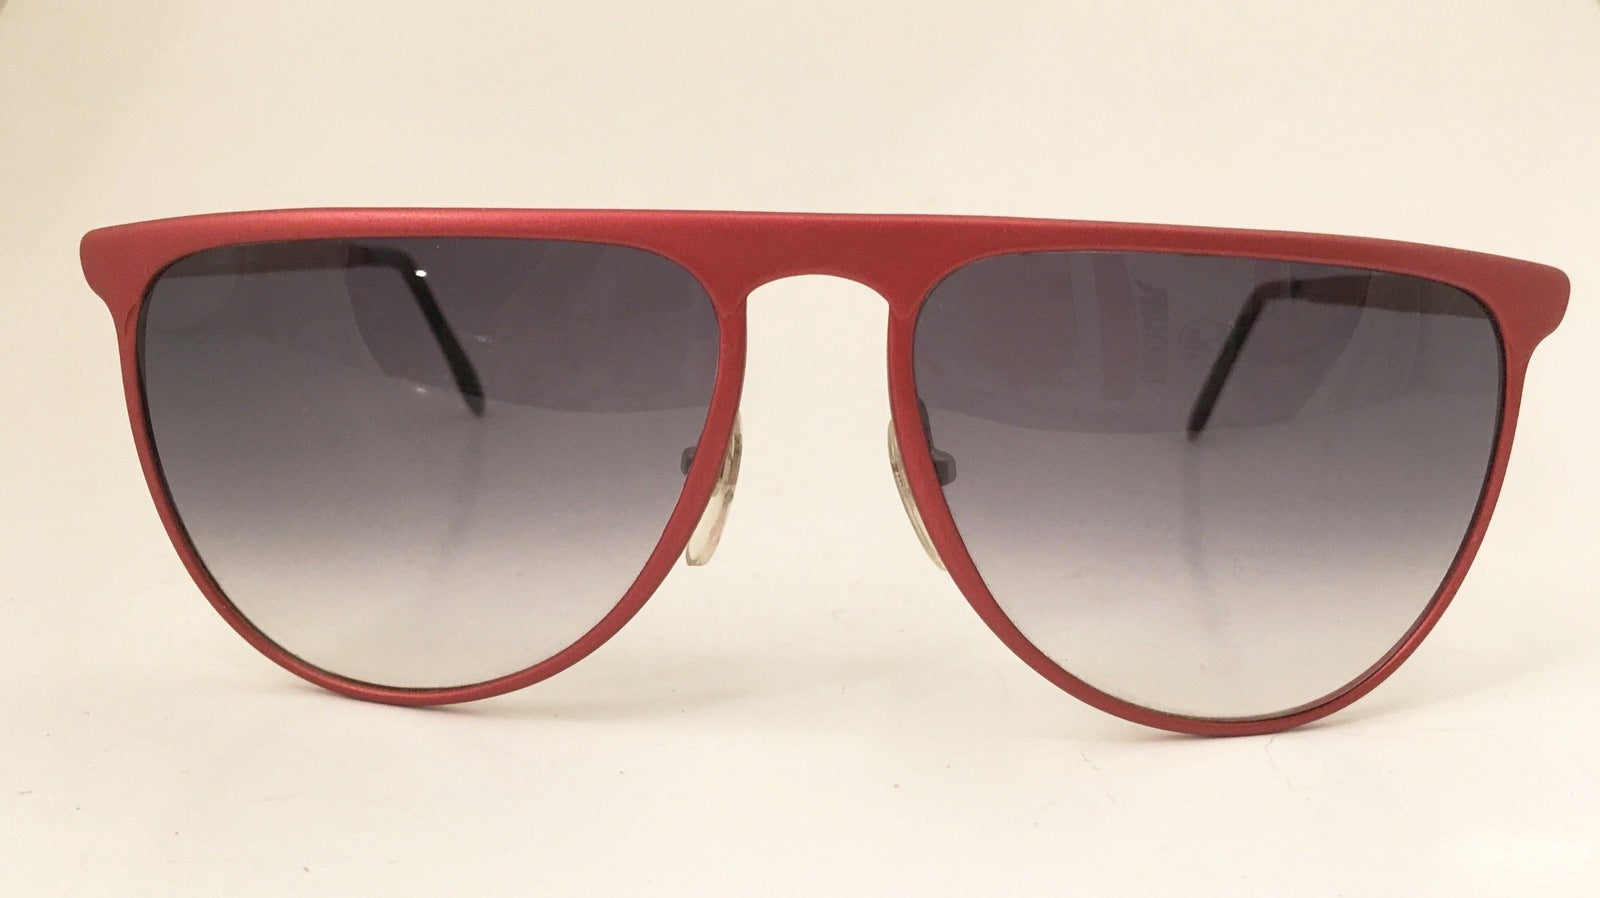 Red Metal Frame Sunglasses Degrade Shades Vintage Eyewear Made in Italy